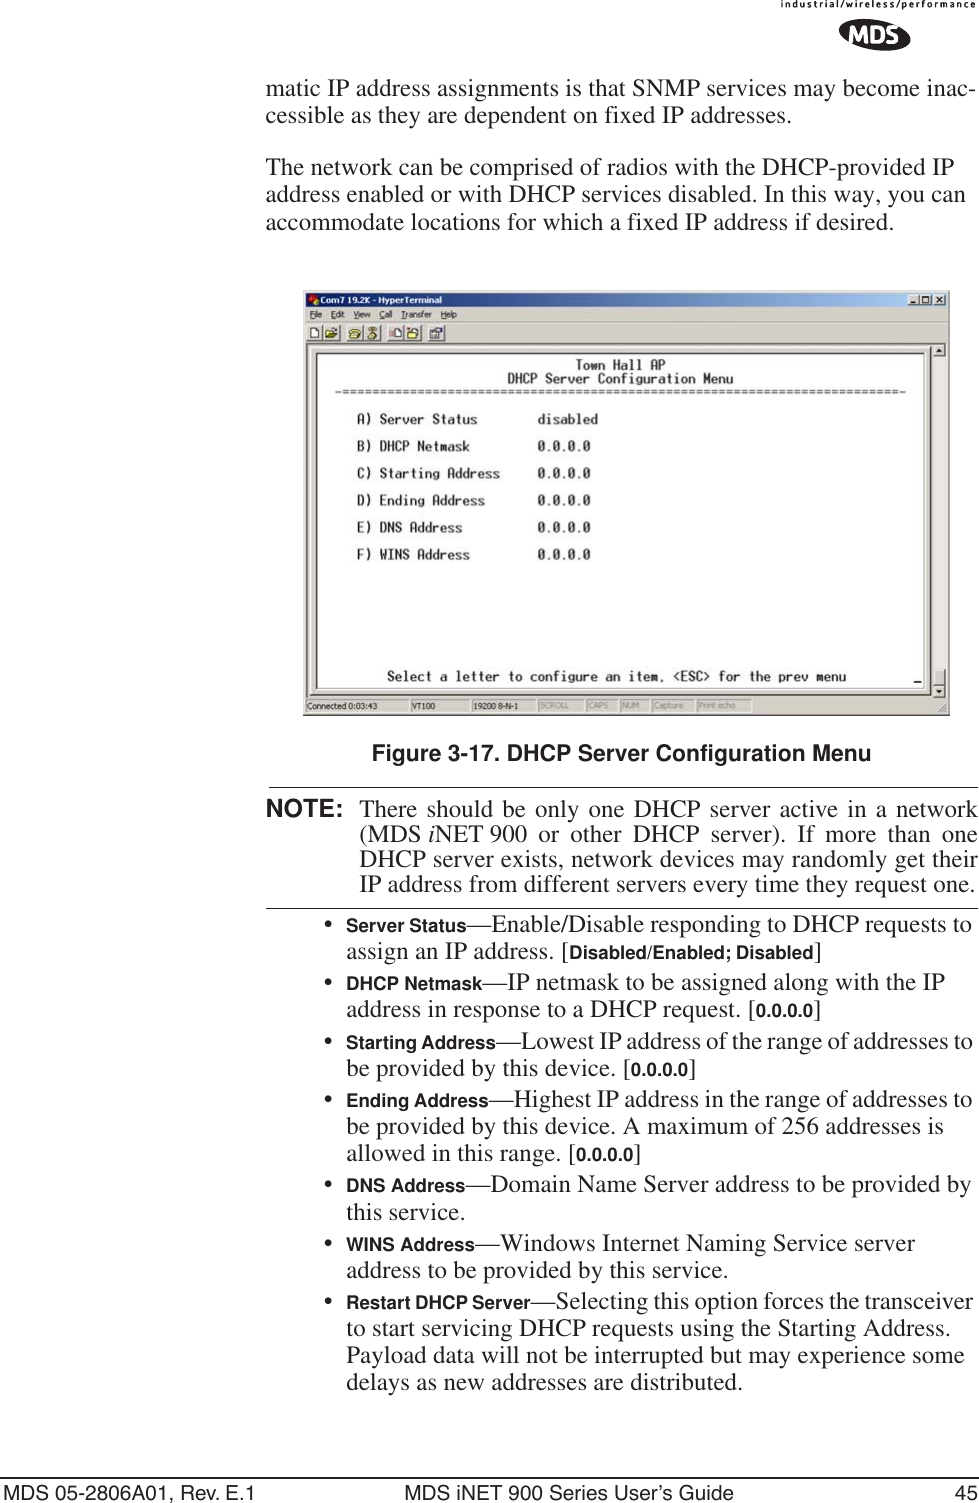 MDS 05-2806A01, Rev. E.1 MDS iNET 900 Series User’s Guide 45matic IP address assignments is that SNMP services may become inac-cessible as they are dependent on fixed IP addresses.The network can be comprised of radios with the DHCP-provided IP address enabled or with DHCP services disabled. In this way, you can accommodate locations for which a fixed IP address if desired.Figure 3-17. DHCP Server Configuration MenuNOTE: There should be only one DHCP server active in a network(MDS iNET 900 or other DHCP server). If more than oneDHCP server exists, network devices may randomly get theirIP address from different servers every time they request one.•Server Status—Enable/Disable responding to DHCP requests to assign an IP address. [Disabled/Enabled; Disabled]•DHCP Netmask—IP netmask to be assigned along with the IP address in response to a DHCP request. [0.0.0.0]•Starting Address—Lowest IP address of the range of addresses to be provided by this device. [0.0.0.0]•Ending Address—Highest IP address in the range of addresses to be provided by this device. A maximum of 256 addresses is allowed in this range. [0.0.0.0]•DNS Address—Domain Name Server address to be provided by this service.•WINS Address—Windows Internet Naming Service server address to be provided by this service.•Restart DHCP Server—Selecting this option forces the transceiver to start servicing DHCP requests using the Starting Address. Payload data will not be interrupted but may experience some delays as new addresses are distributed.